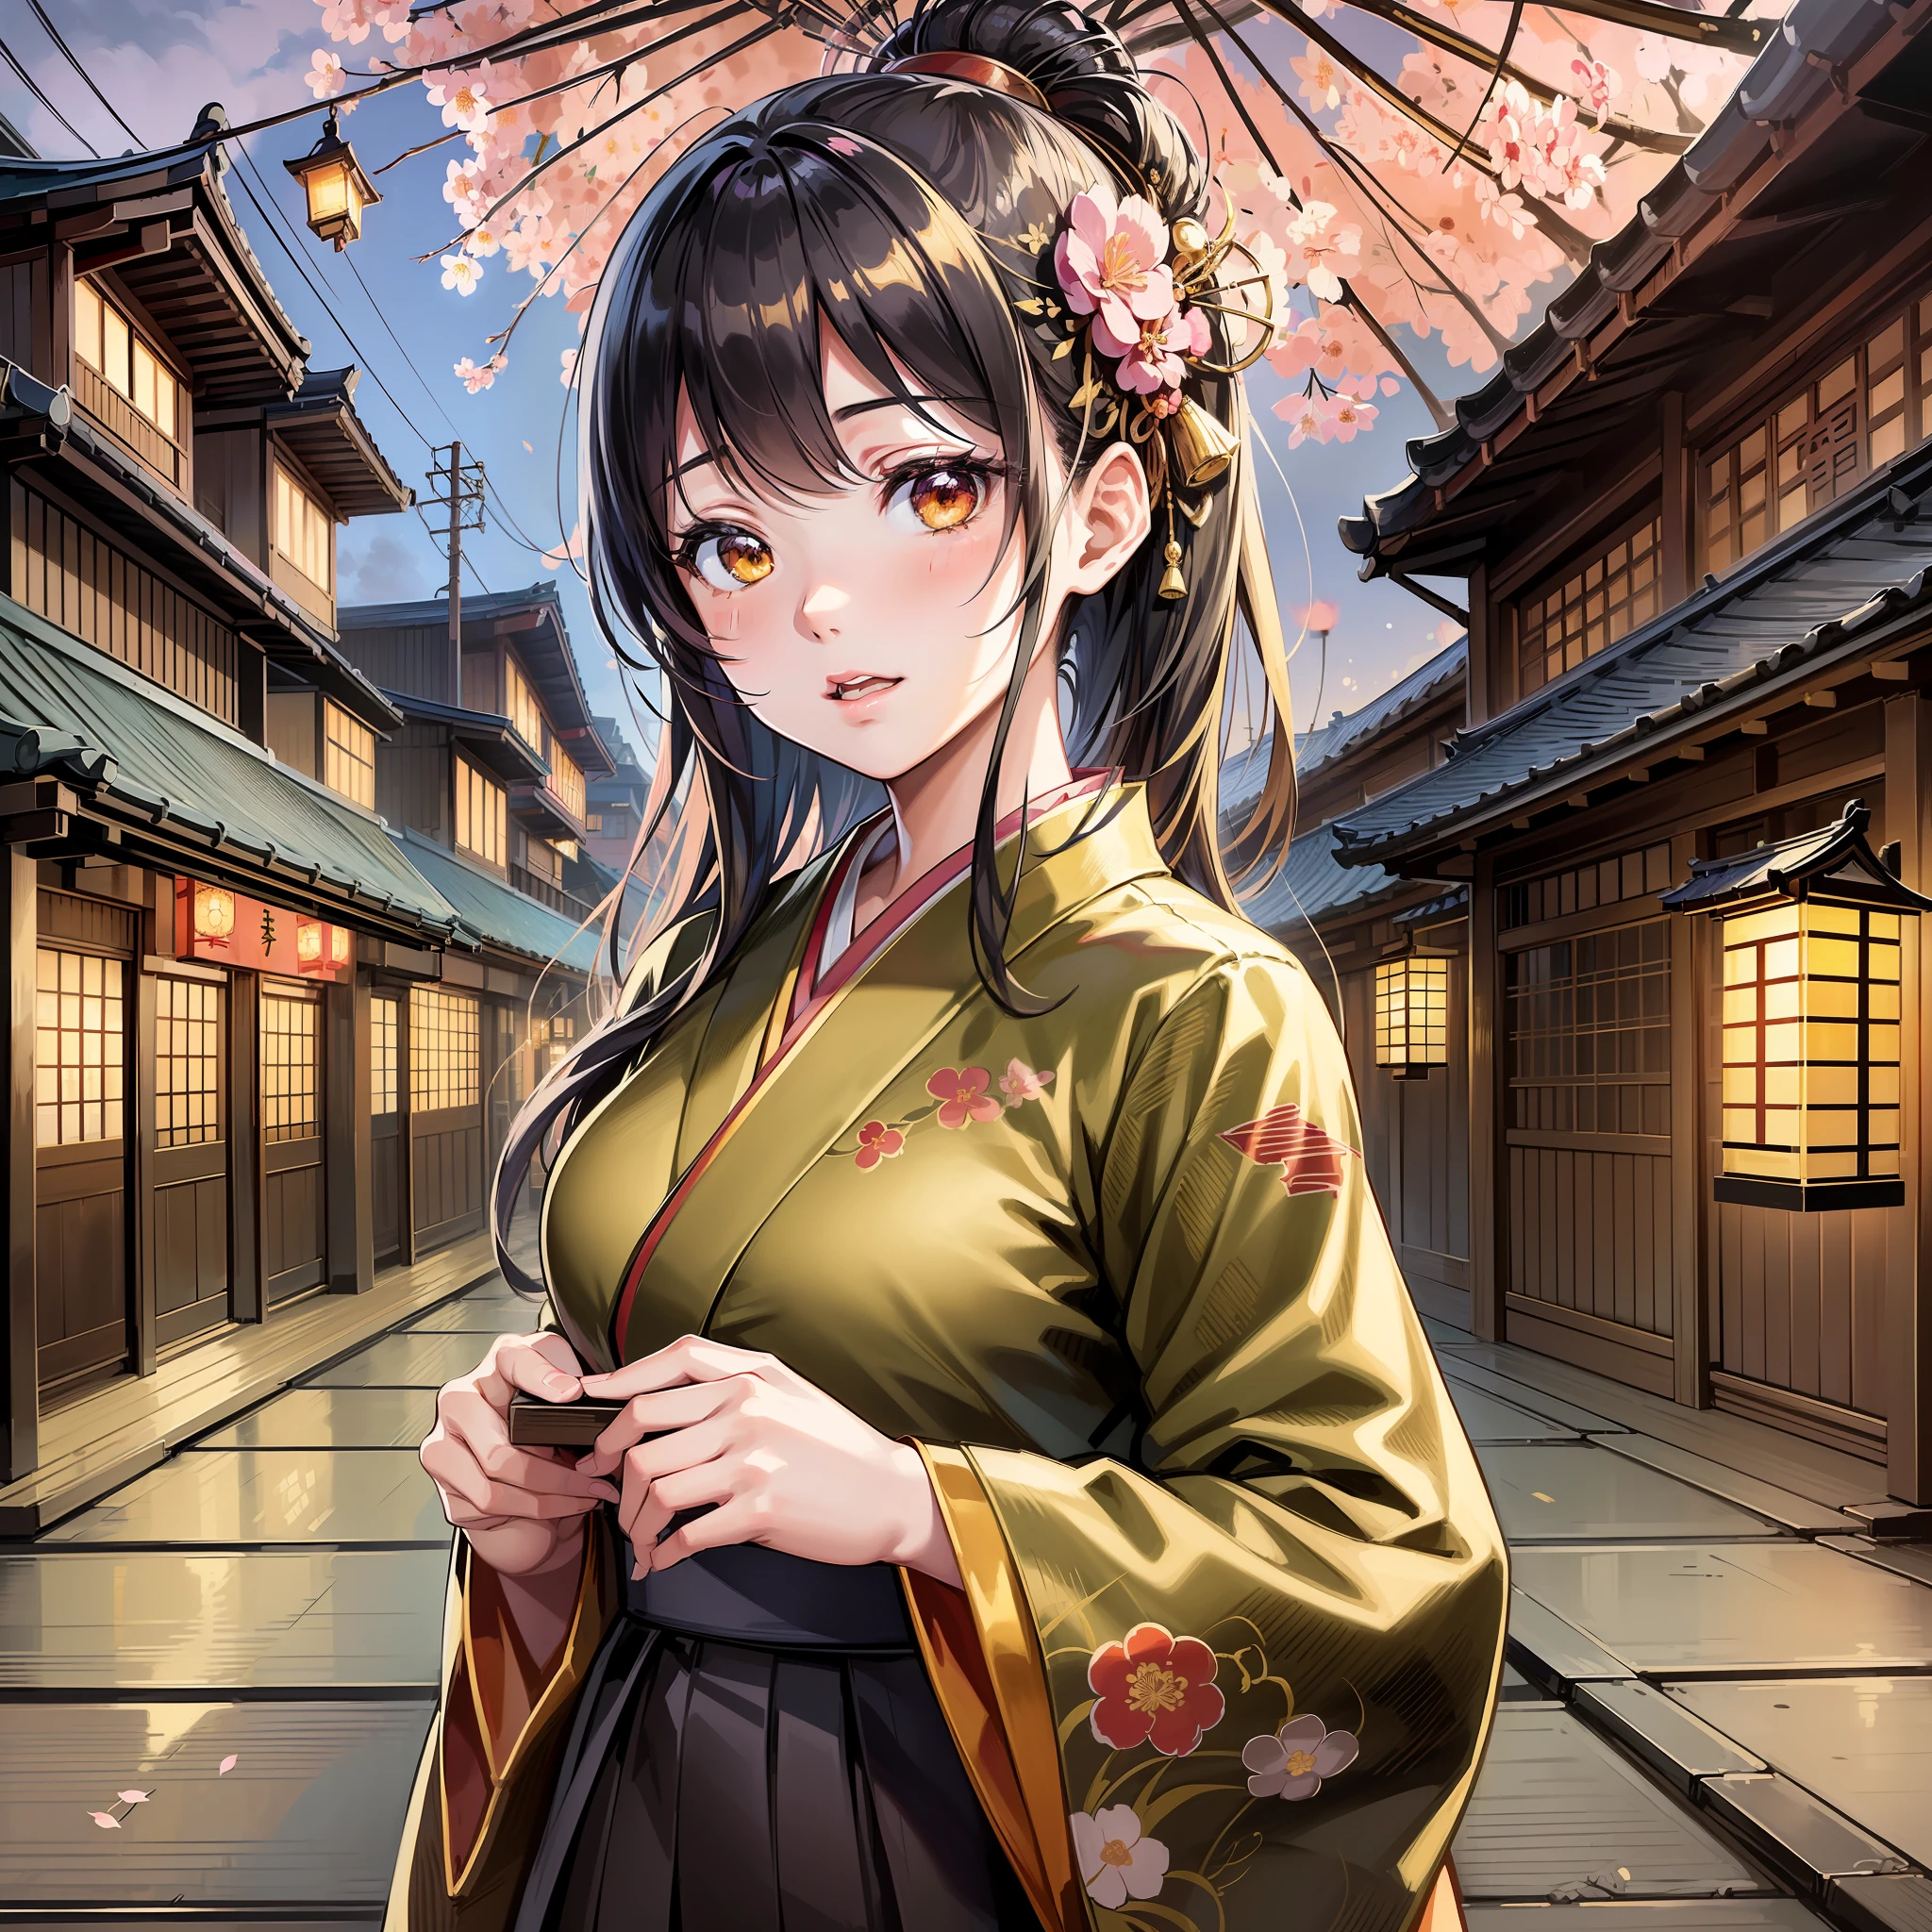 (anime style, realistic drawing, high quality, detailed, masterpiece), young Japanese girl (1girl), (kimono clothes, 1880s century fashion), black hair, (traditional wooden building, Tokyo cityscape), (lanterns, sakura blossom), (dynamic angle, mid-shot), Japanese calligraphy (embedding), (dusk, street light), (warm color palette, golden hour)